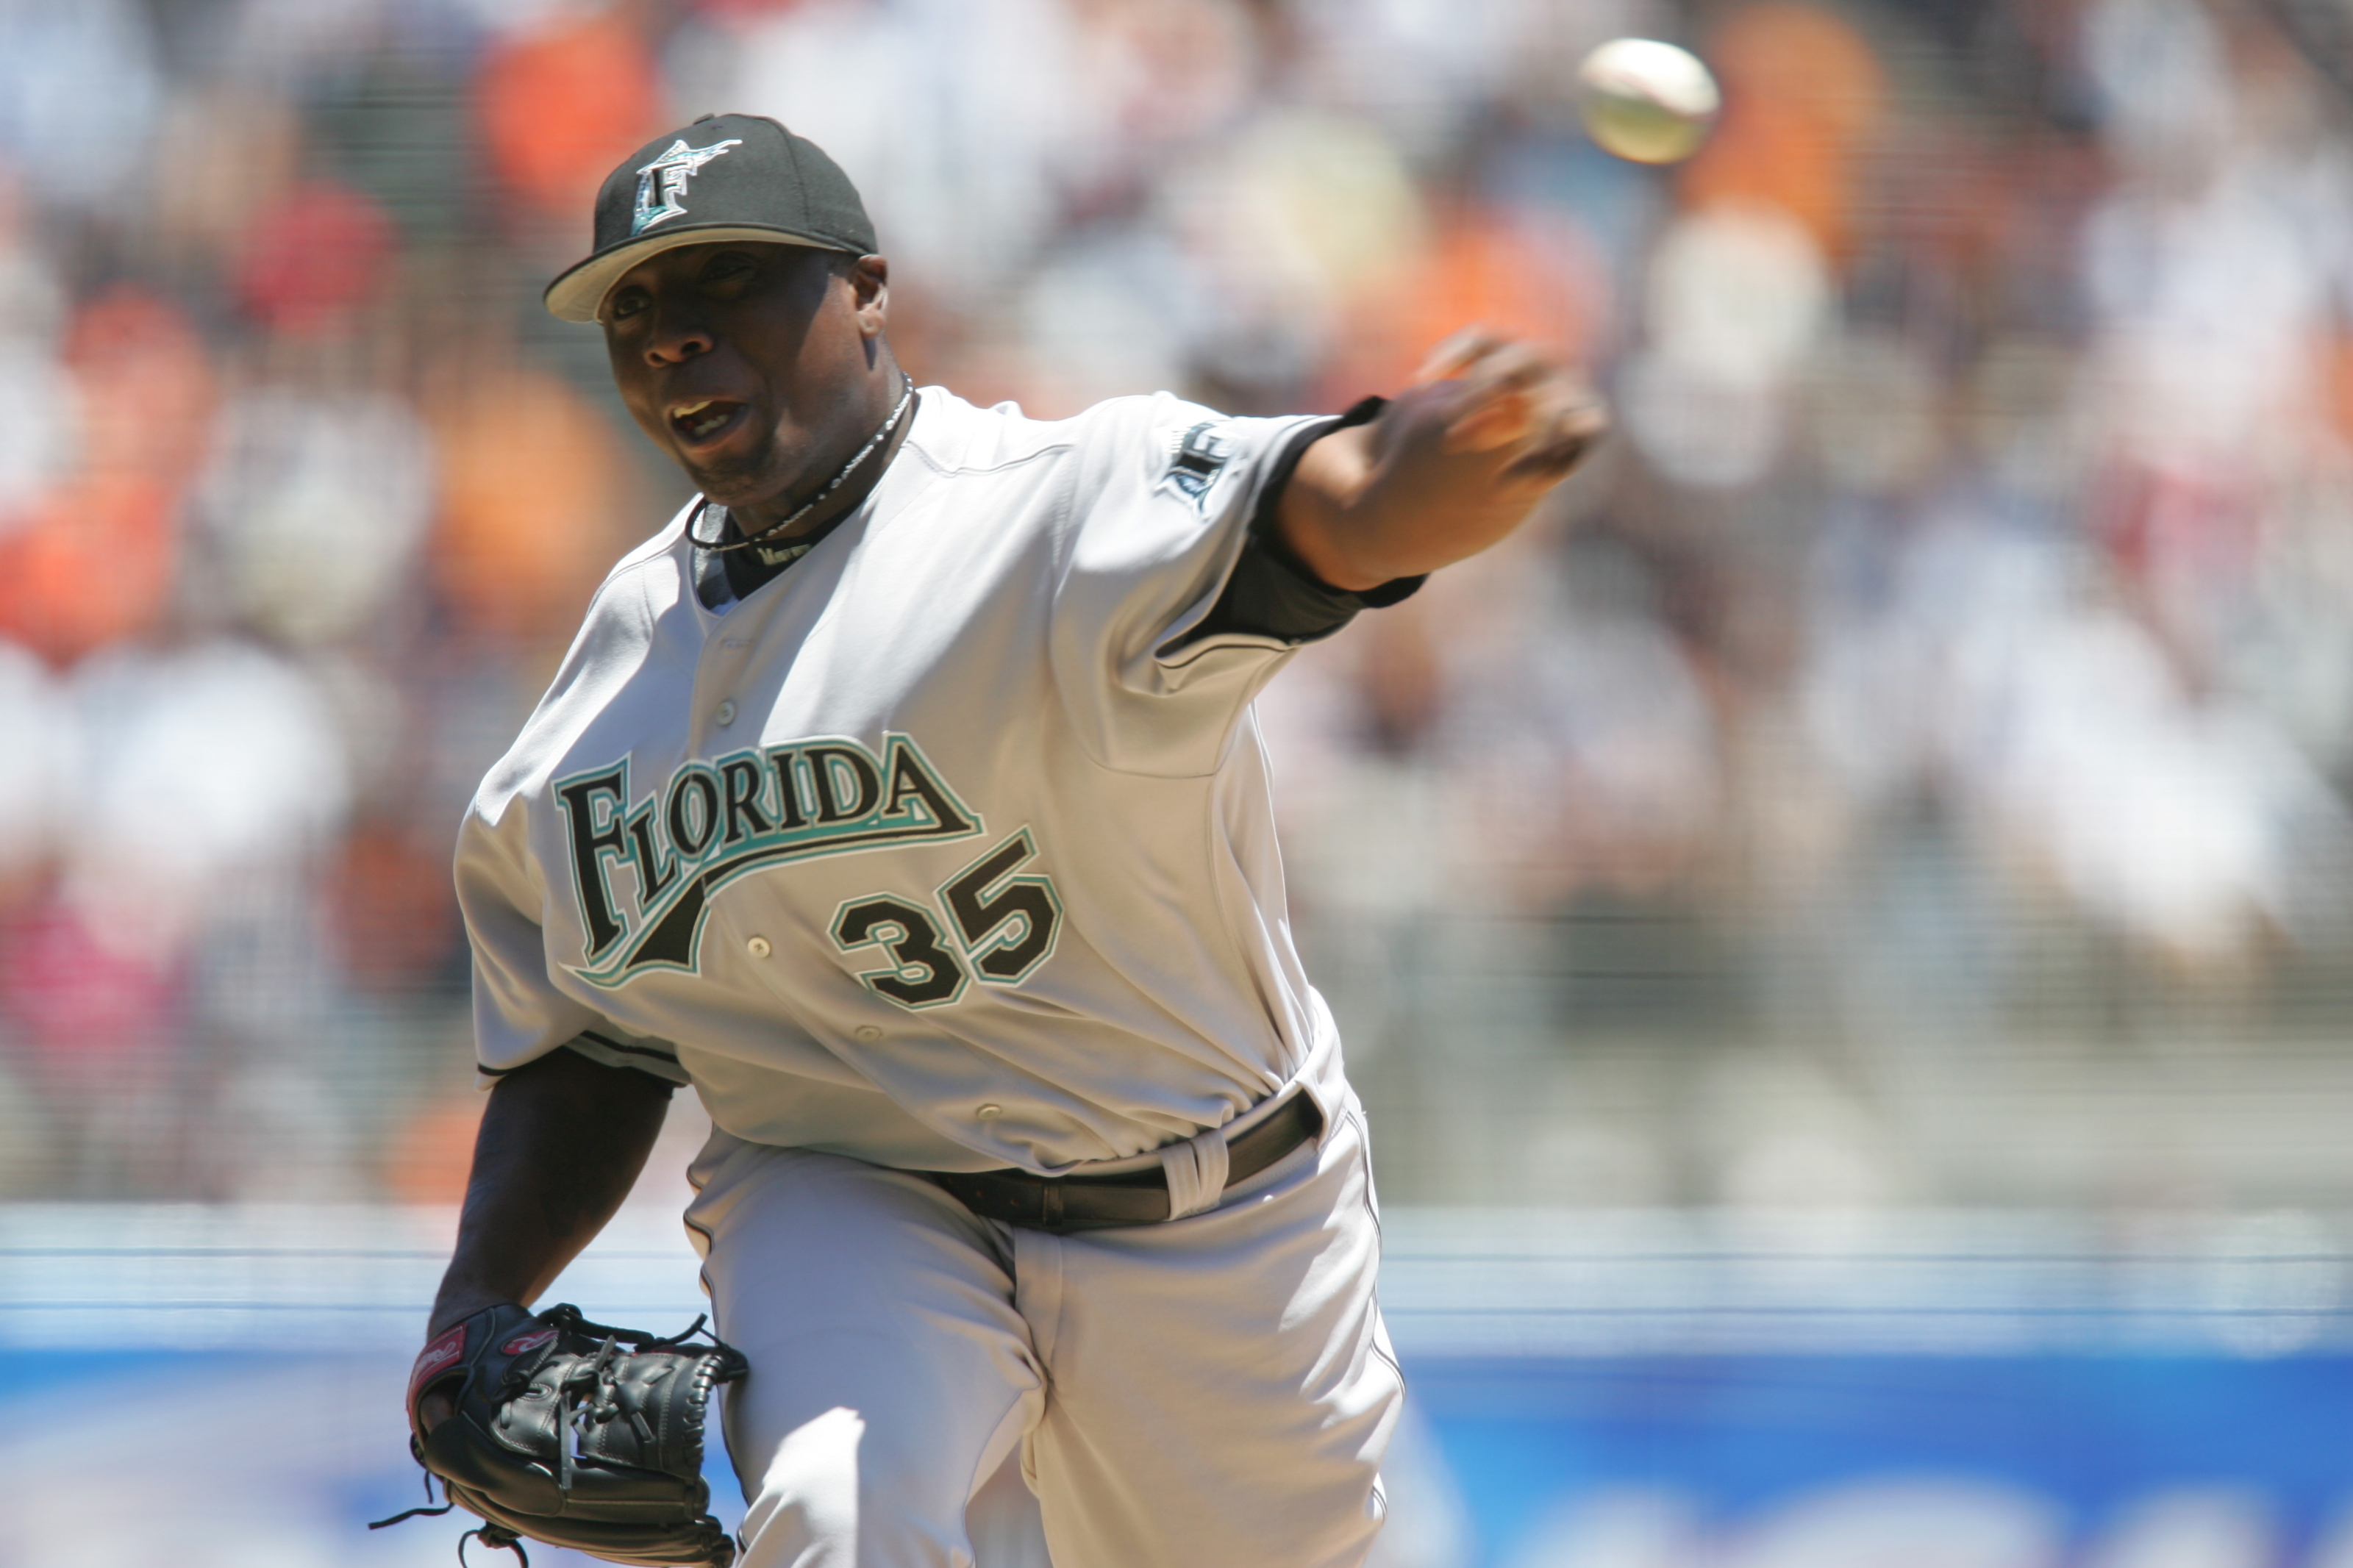 Former MLB pitcher Dontrelle Willis is joining Fox Sports